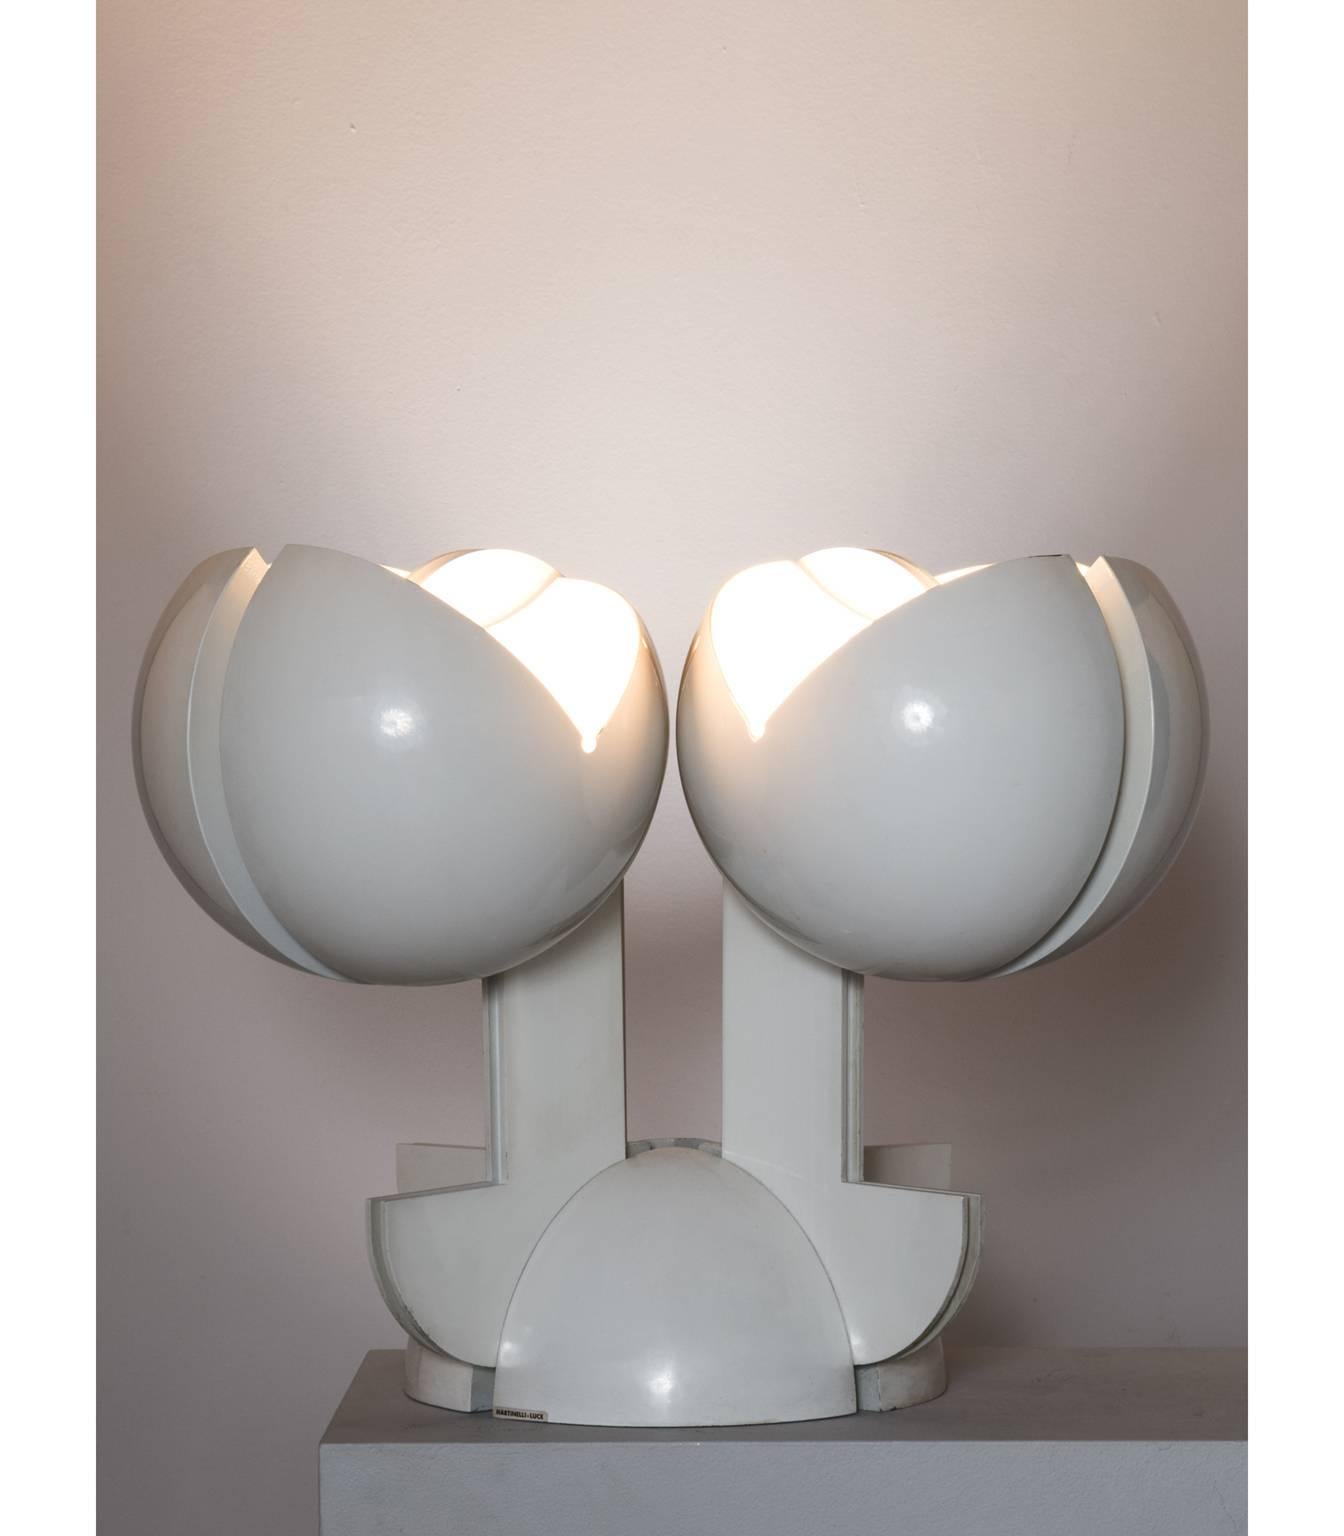 La Ruspa table lamp in metal by Gae Aulenti for Martinelli Luce, Italy, 1968.

Futuristic floor lamp in white coated metal by Italian designer Gae Aulenti. Extremely rare model with four lights. The 'La Ruspa' series of lights by Aulenti is